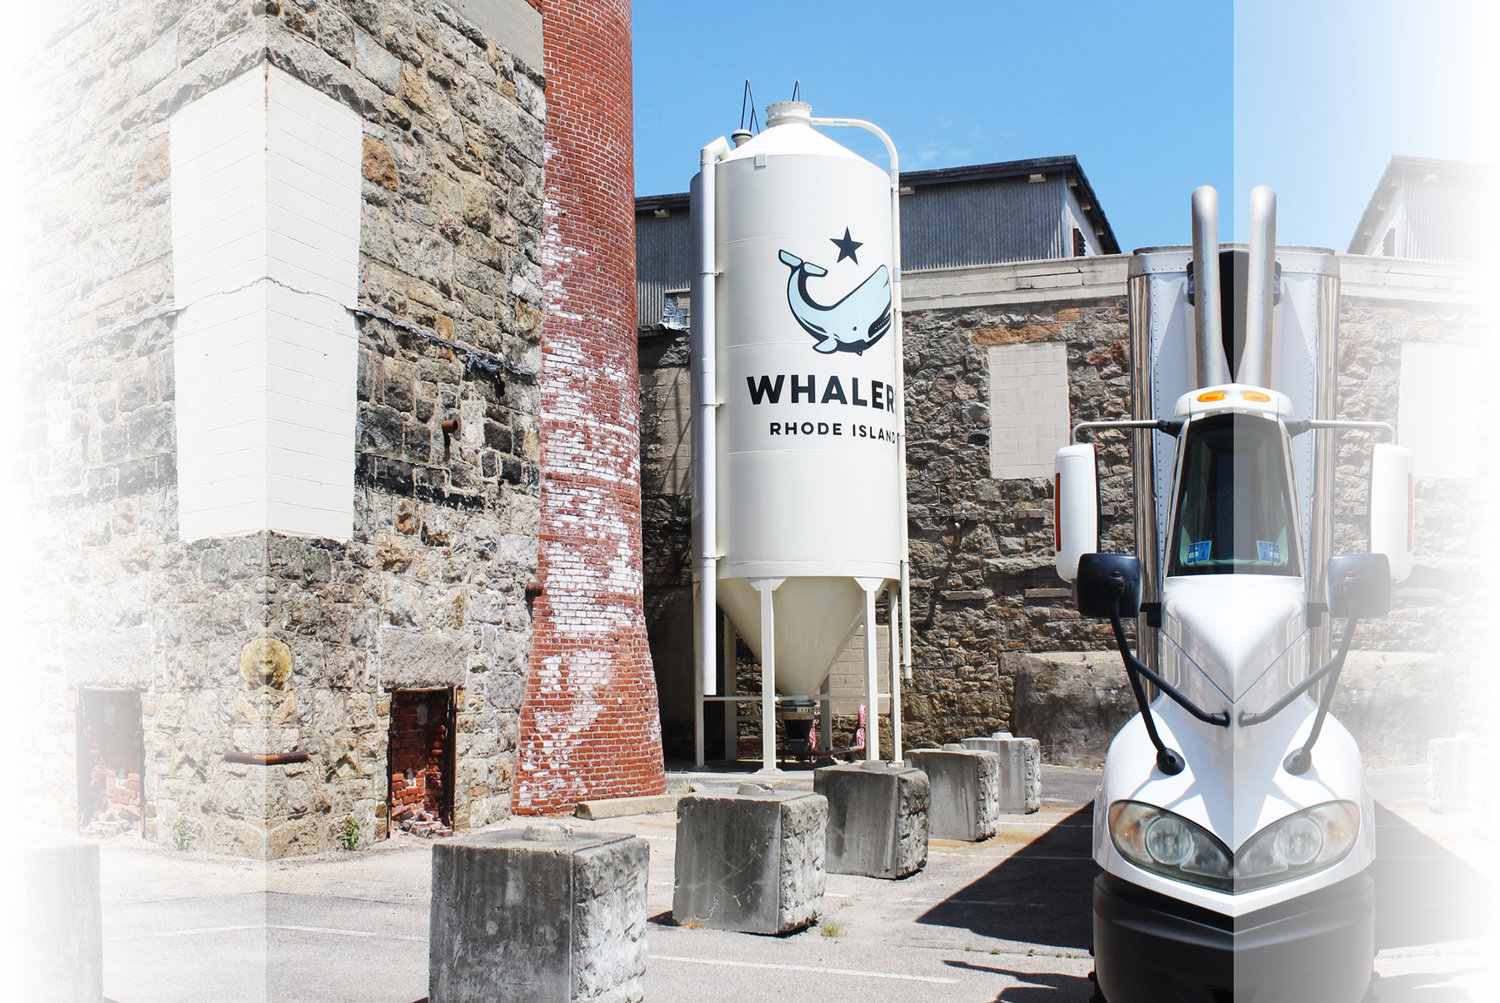 Try a variety of beers, from stouts and IPAs to lagers and pale ales, at Whalers